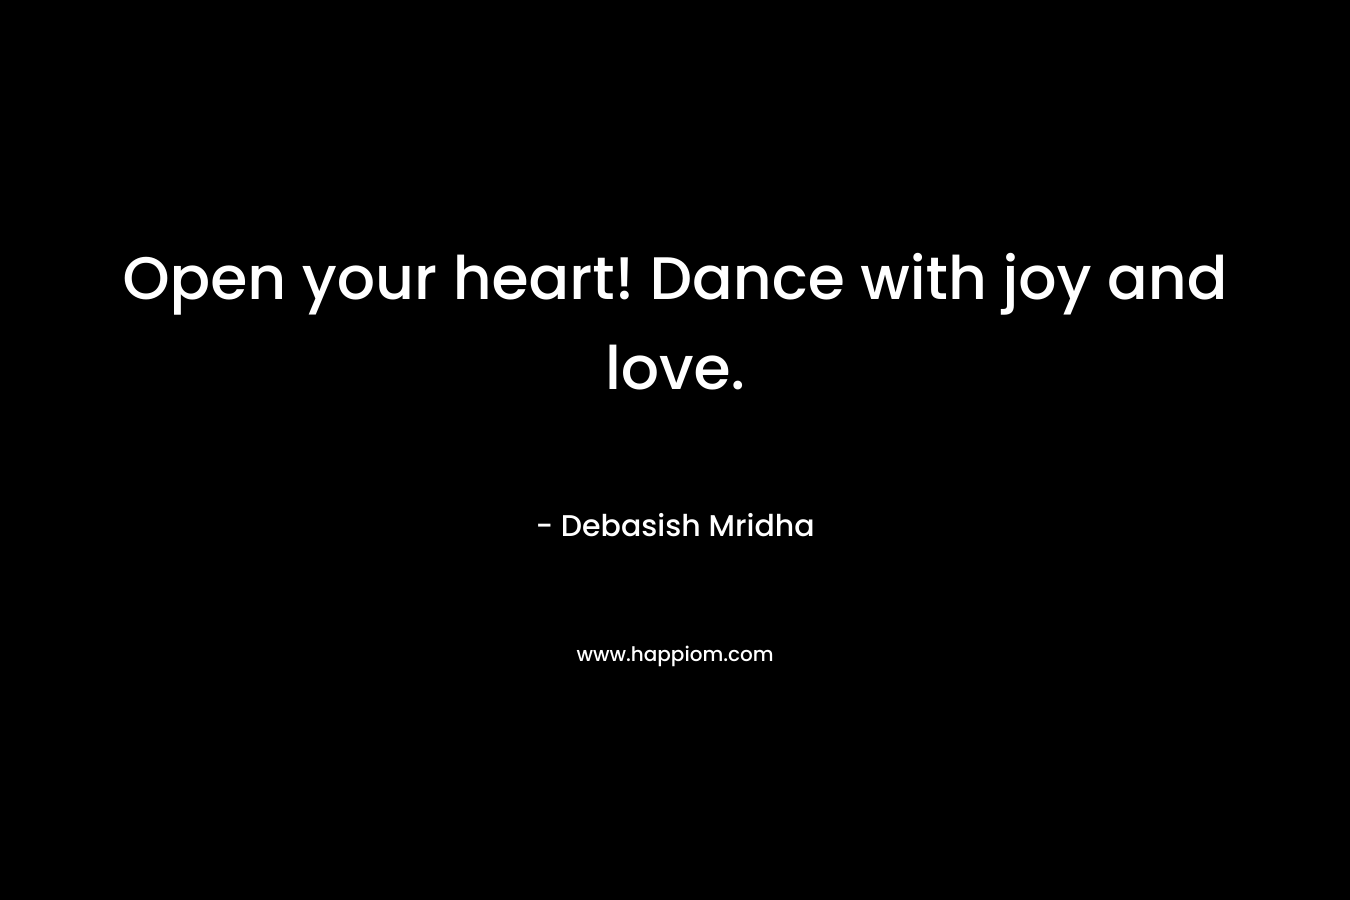 Open your heart! Dance with joy and love.